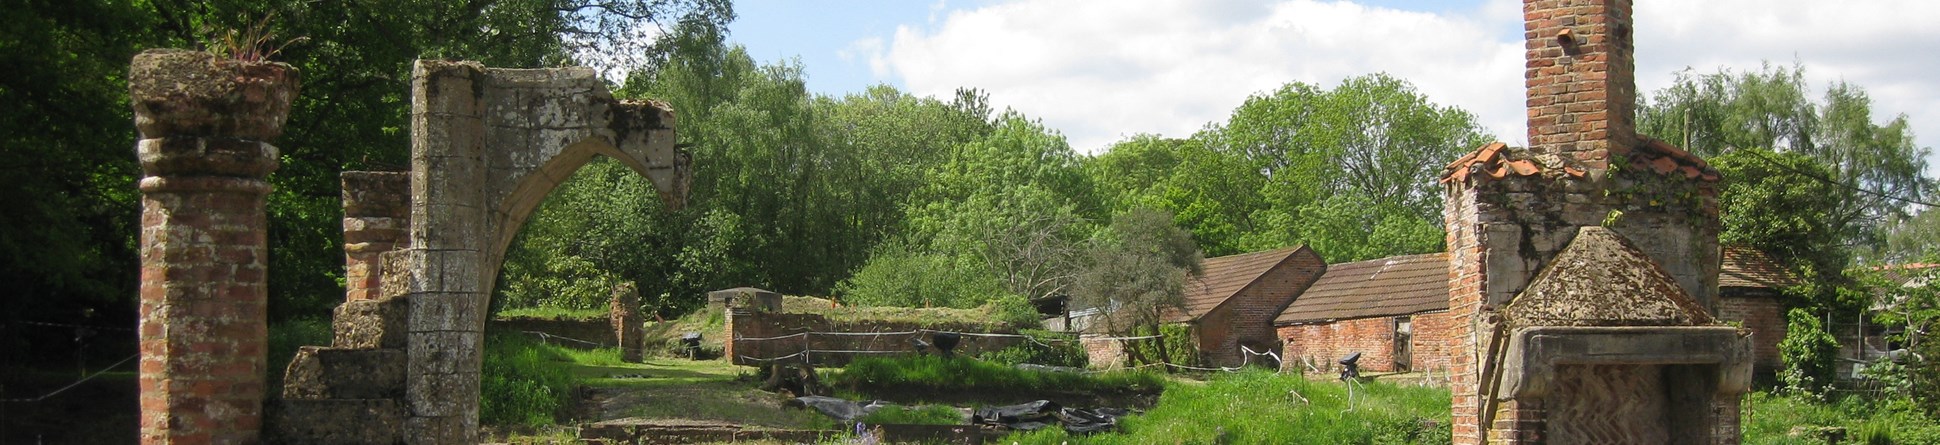 View of a green landscape with ruined brick structures